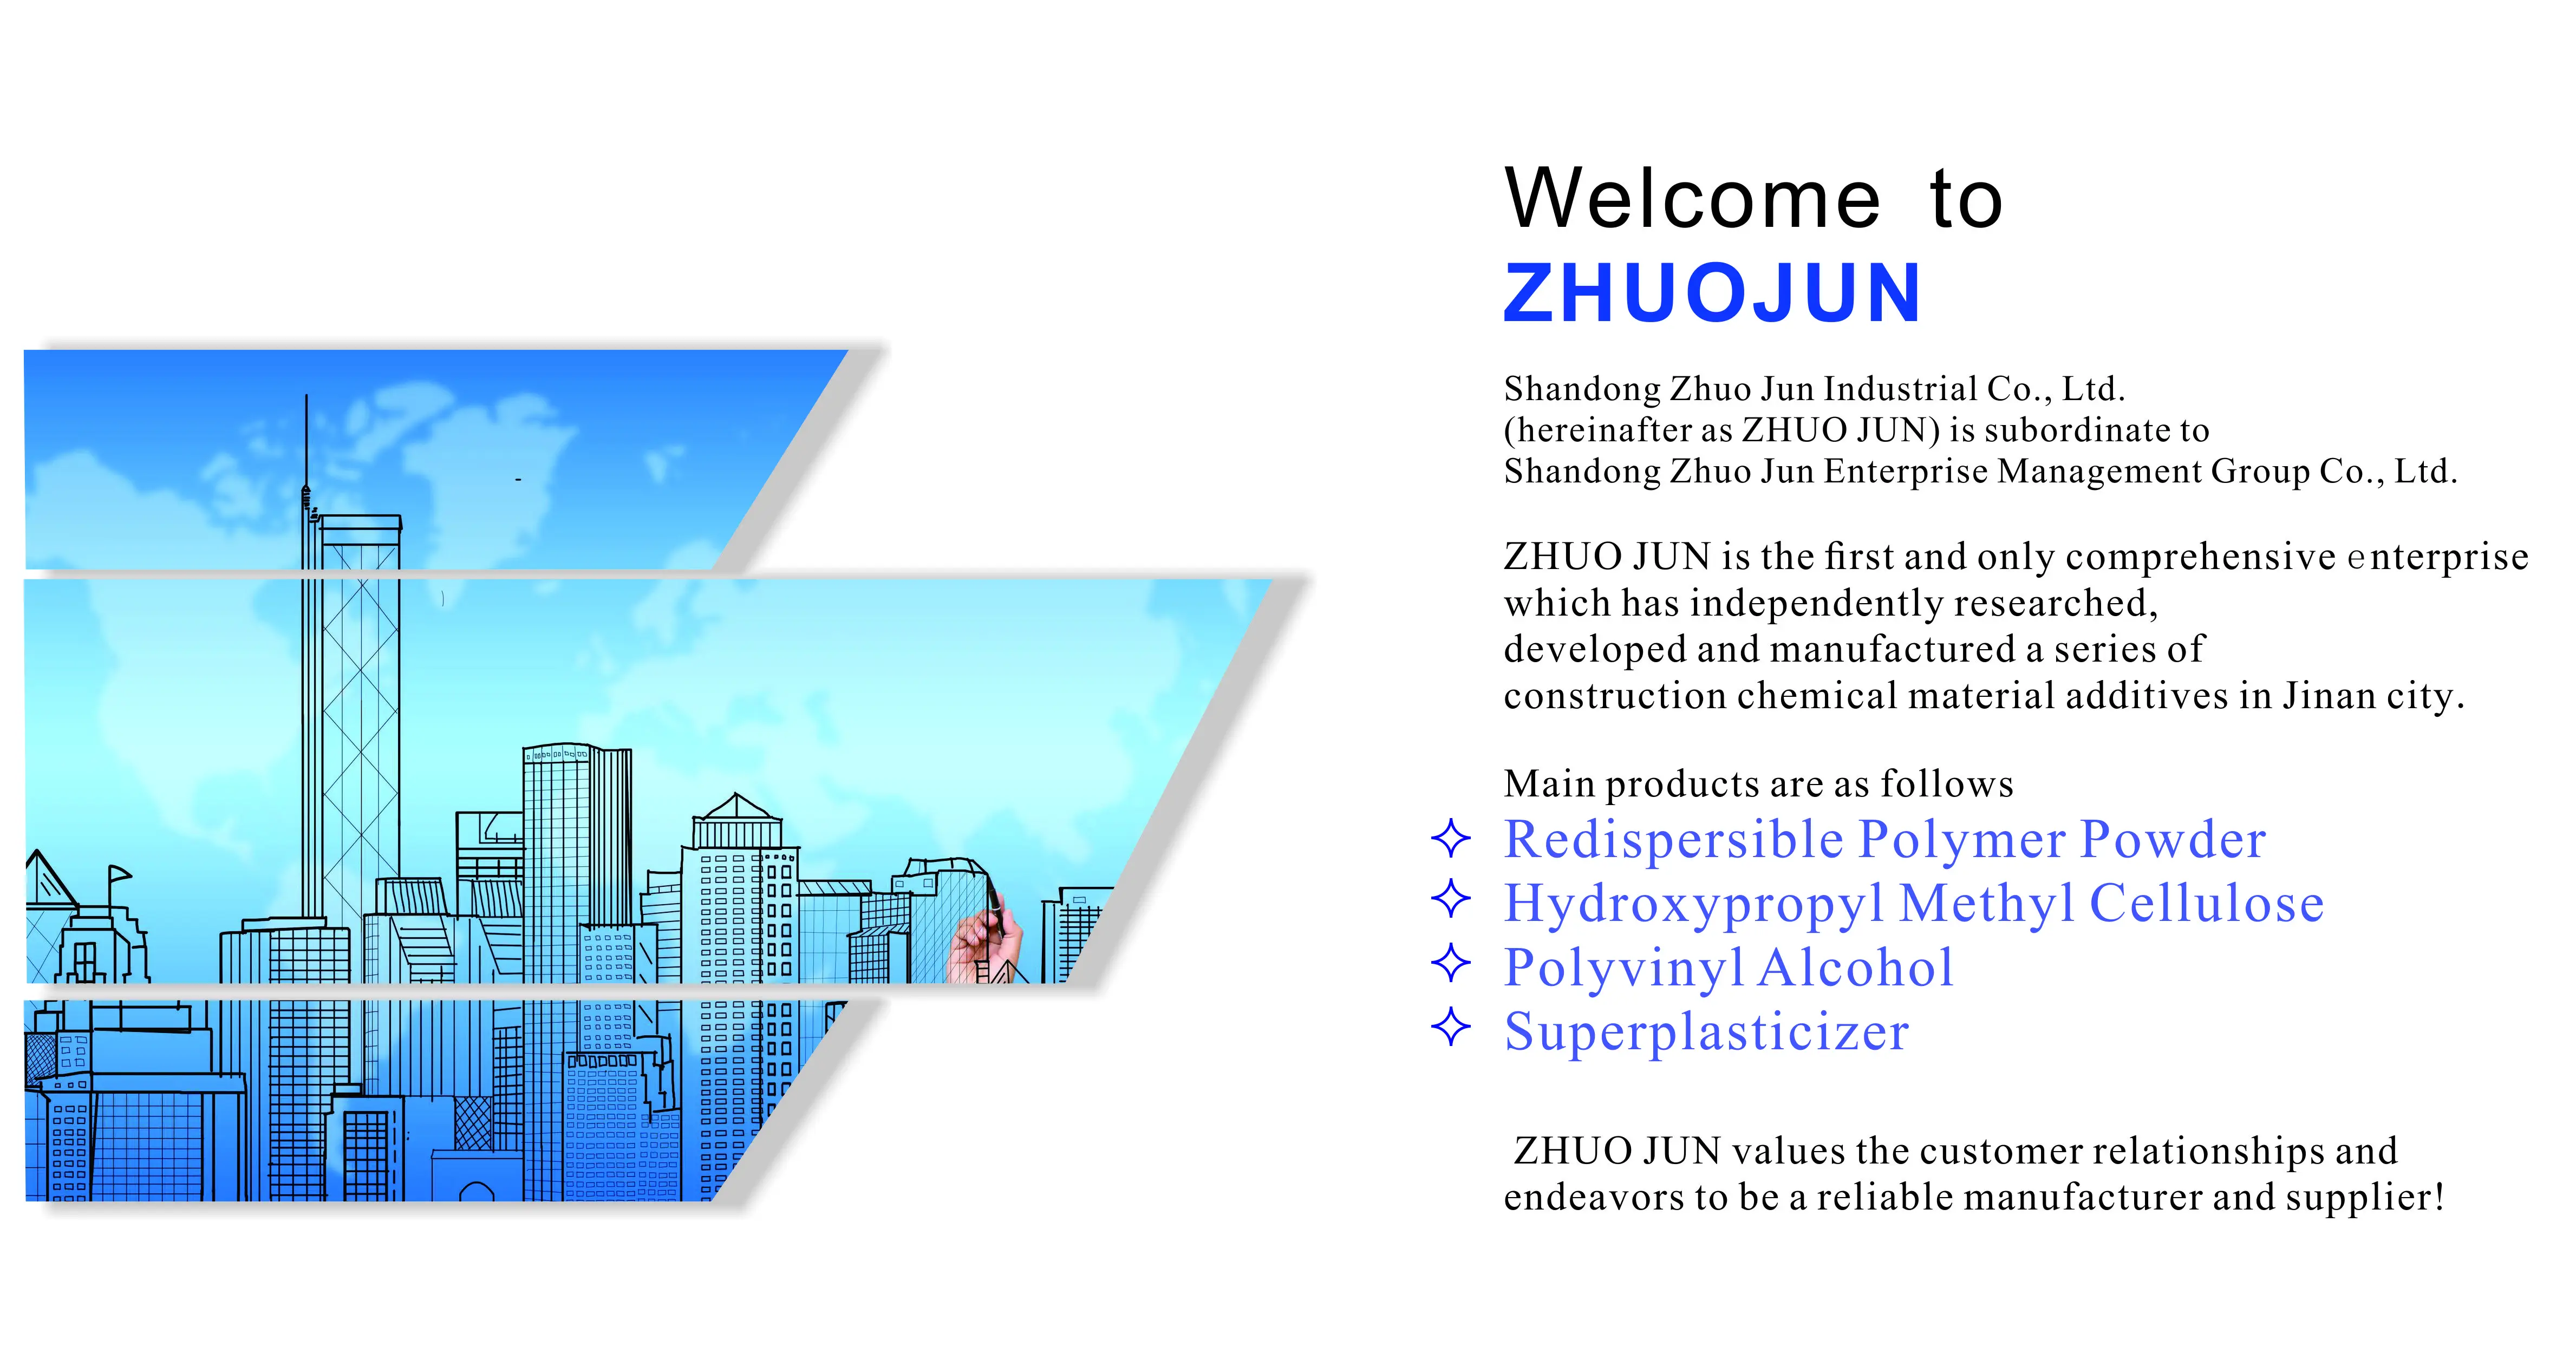 Cheap high-quality sulfonated melamine formaldehyde powder for concrete admixtures made in China